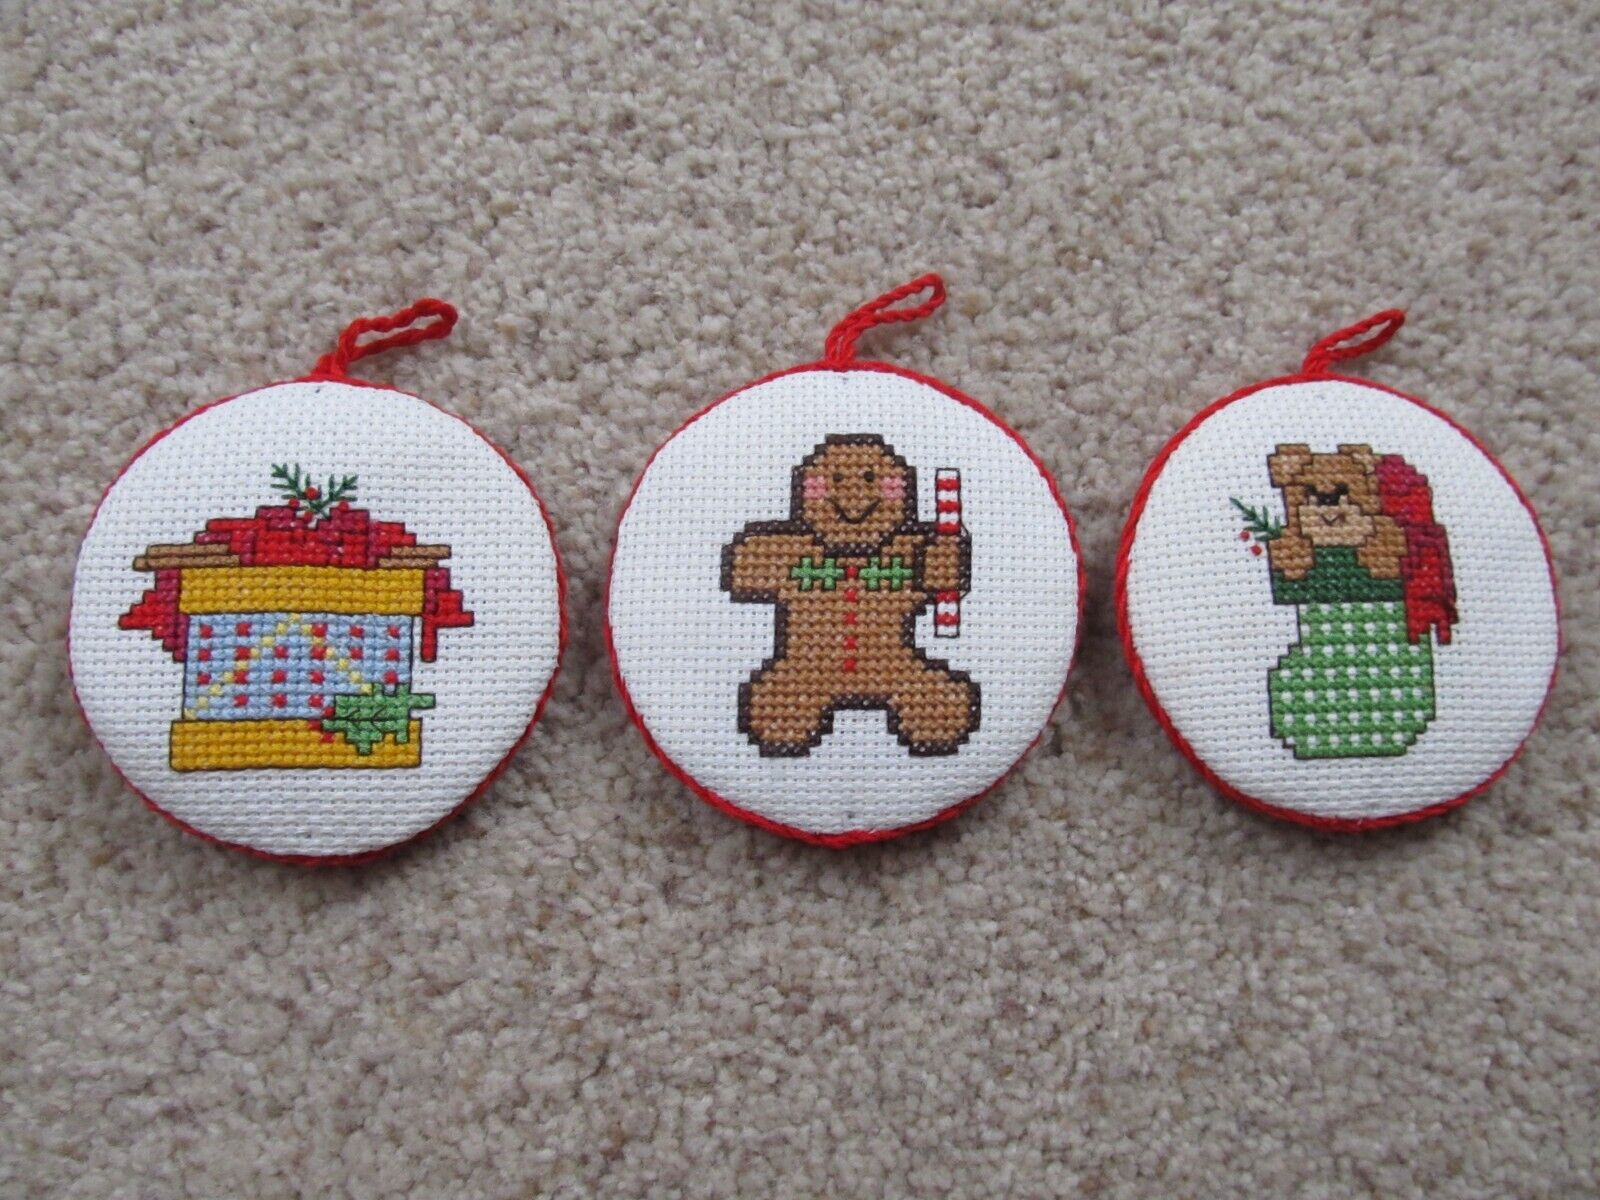 NEW Handcrafted Counted Cross Stitch Christmas Ornaments - Set of 3